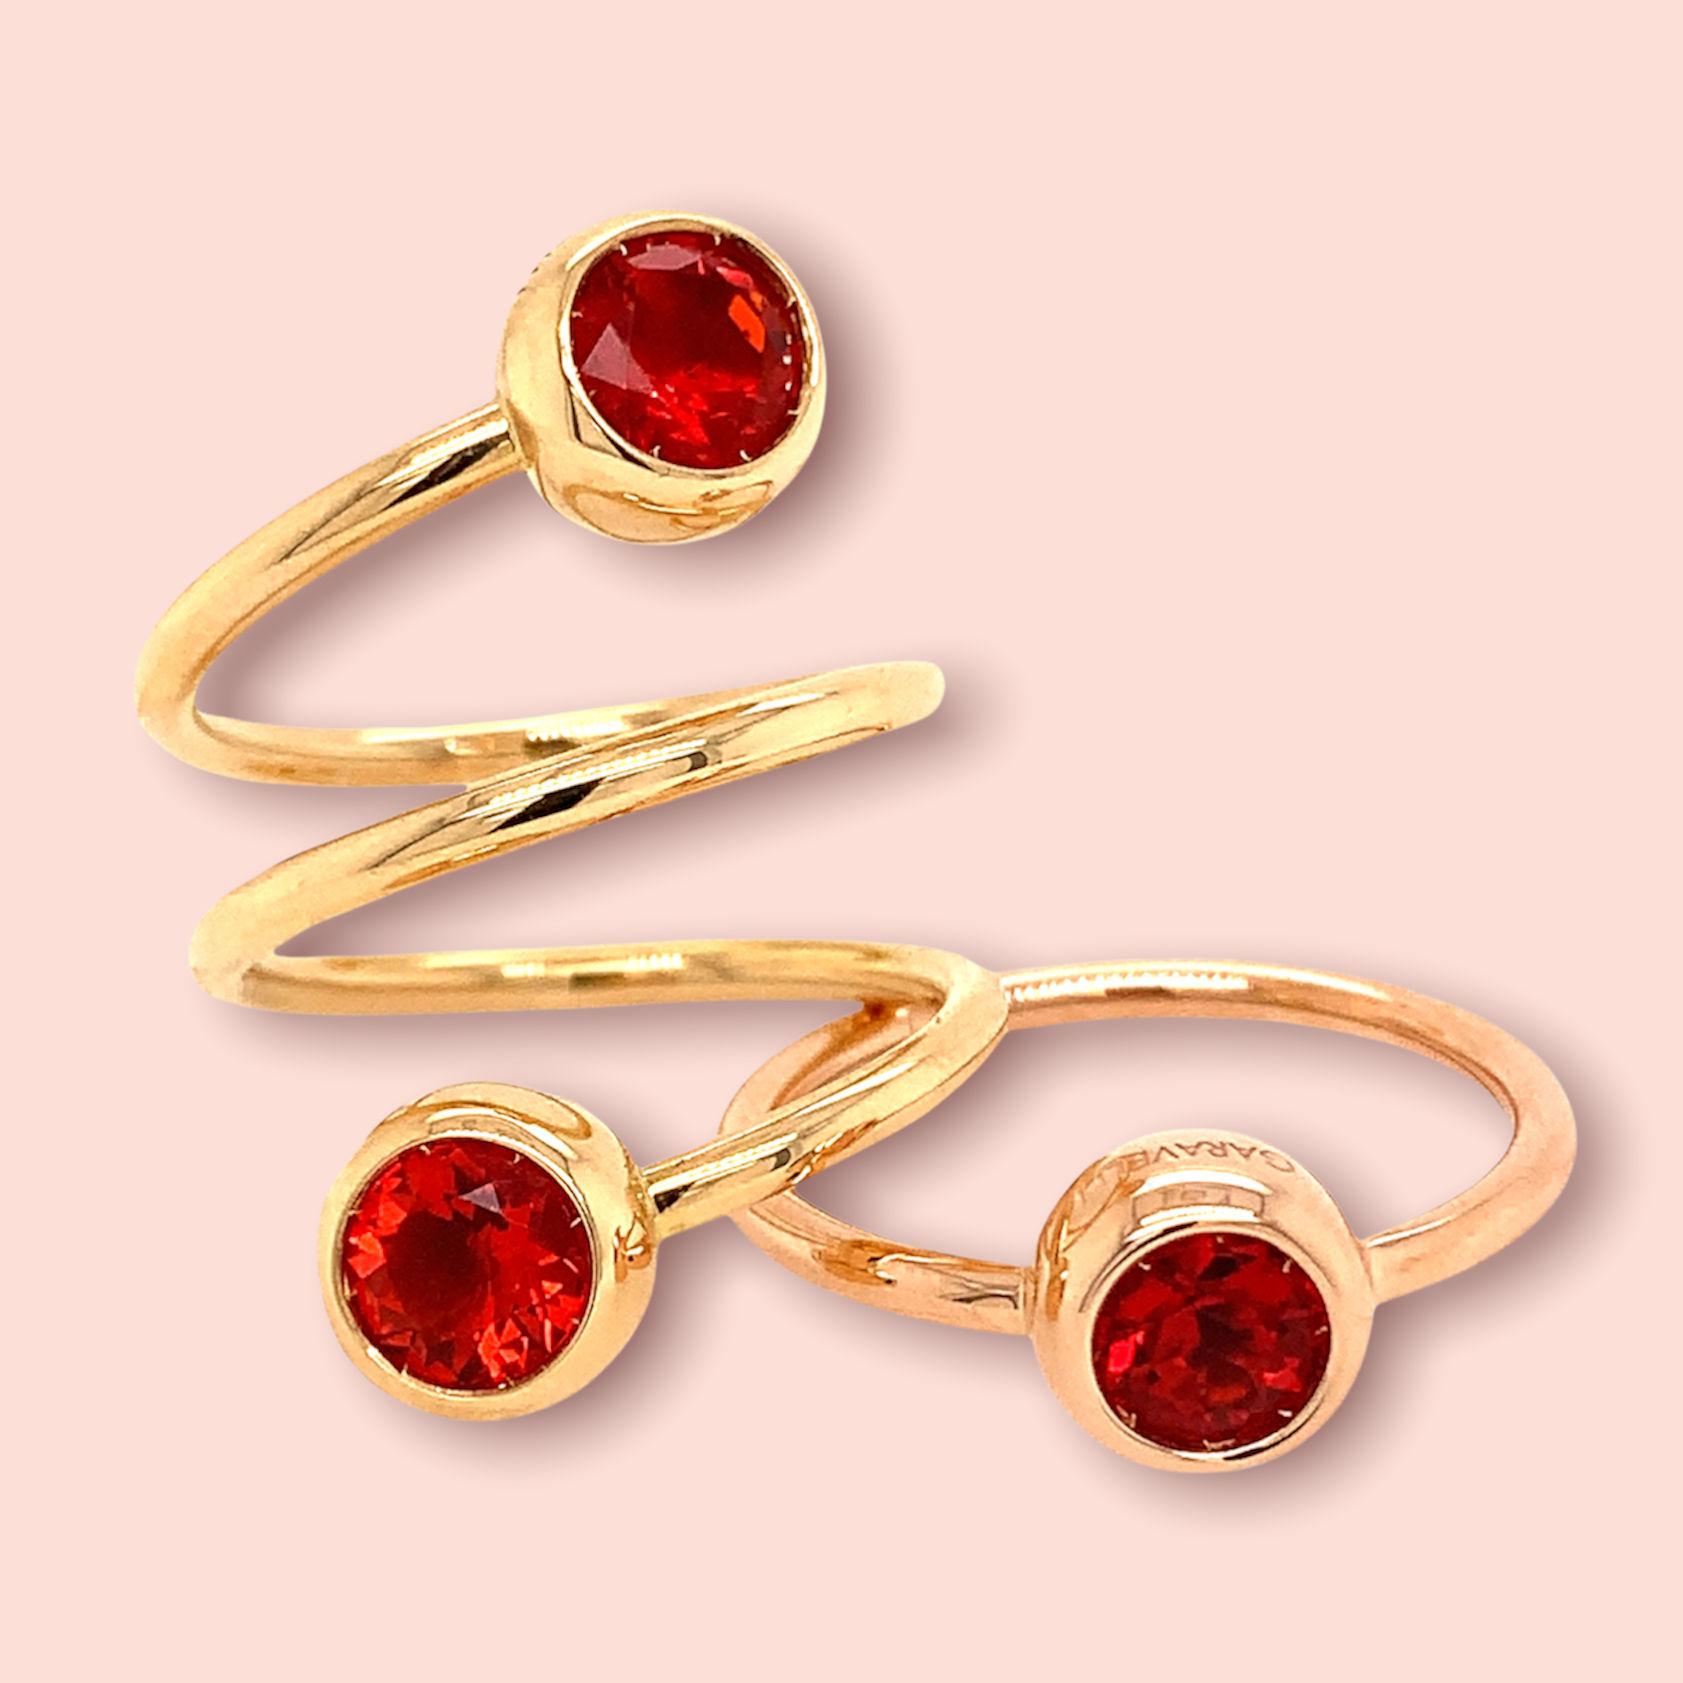 Garavelli 18 Karat Yellow Gold Mexican Fire Opal Giotto Collection Ring. Ring size 53 EU - size 6,5 USA   
The gold head of the ring is diameter mm 8 height mm 4
The red mexican fire opal is ct :0.60  diameter 6 mm
18KT GOLD  :GR 5,27
Also available